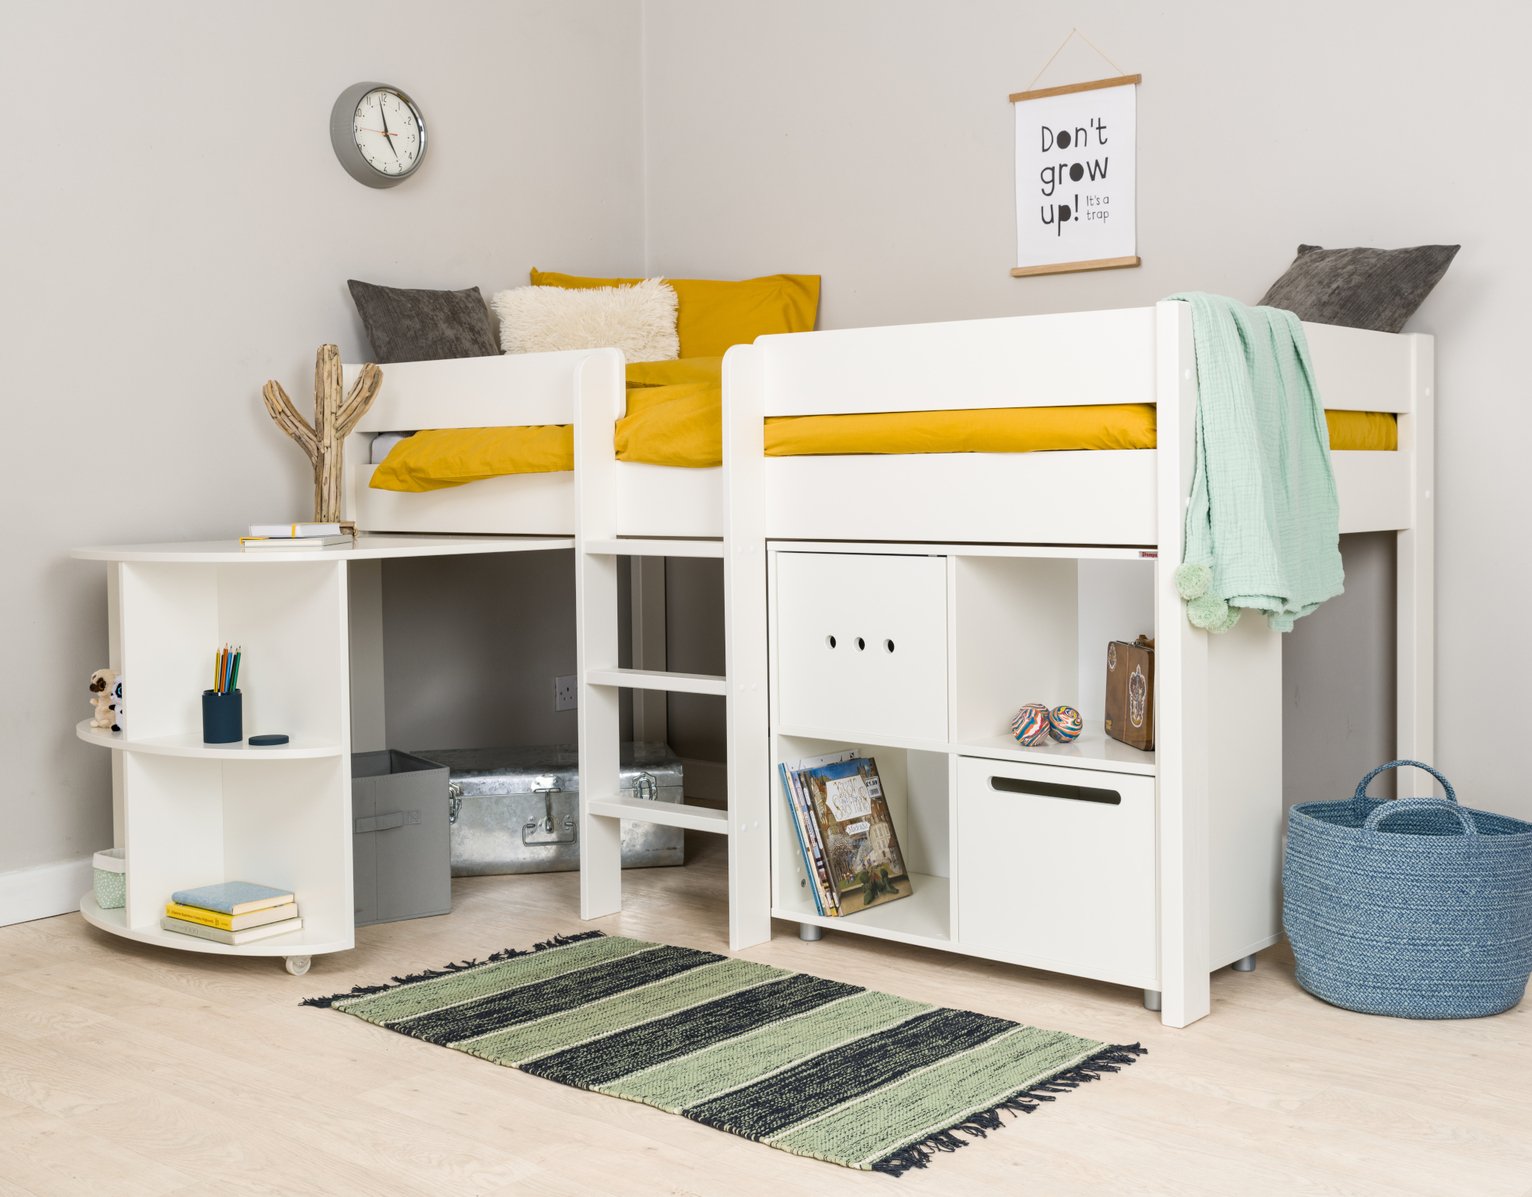 Stompa Mid Sleeper Bed Frame, Desk and Cube Unit Review